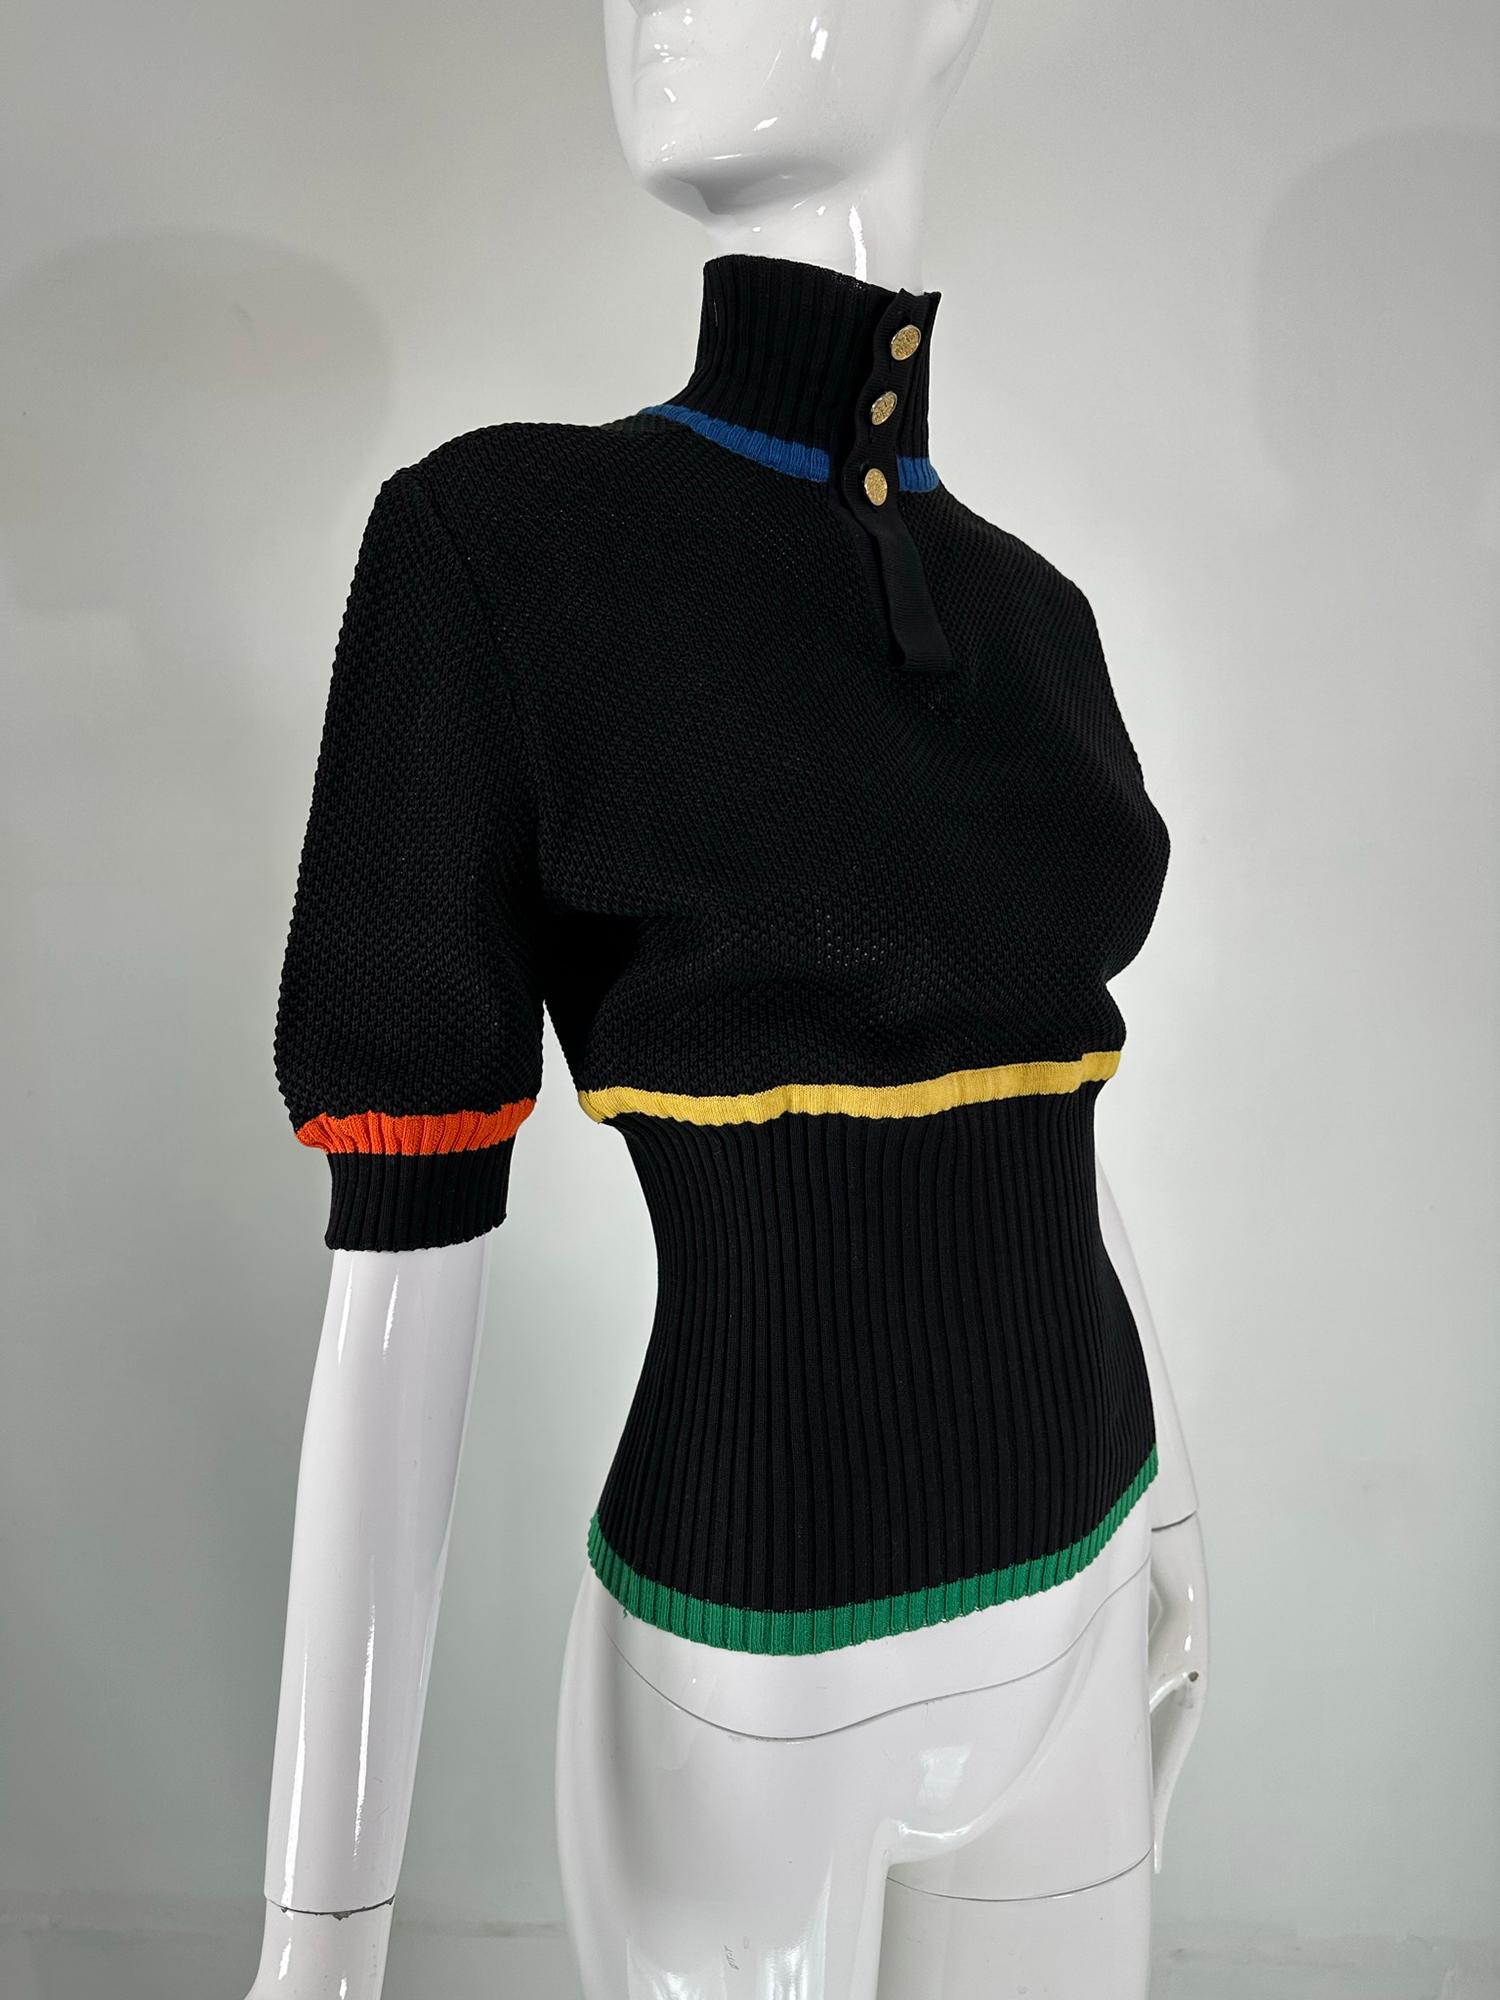 Chanel boutique Black Cotton Crochet & knit sweater with colour stripes & gold Chanel logo buttons at the neck, a rare find from the late 1980s. Ribbed knit placket button neck line. Short puff sleeves, ribbed neck, cuffs & waist. Stripes in blue,